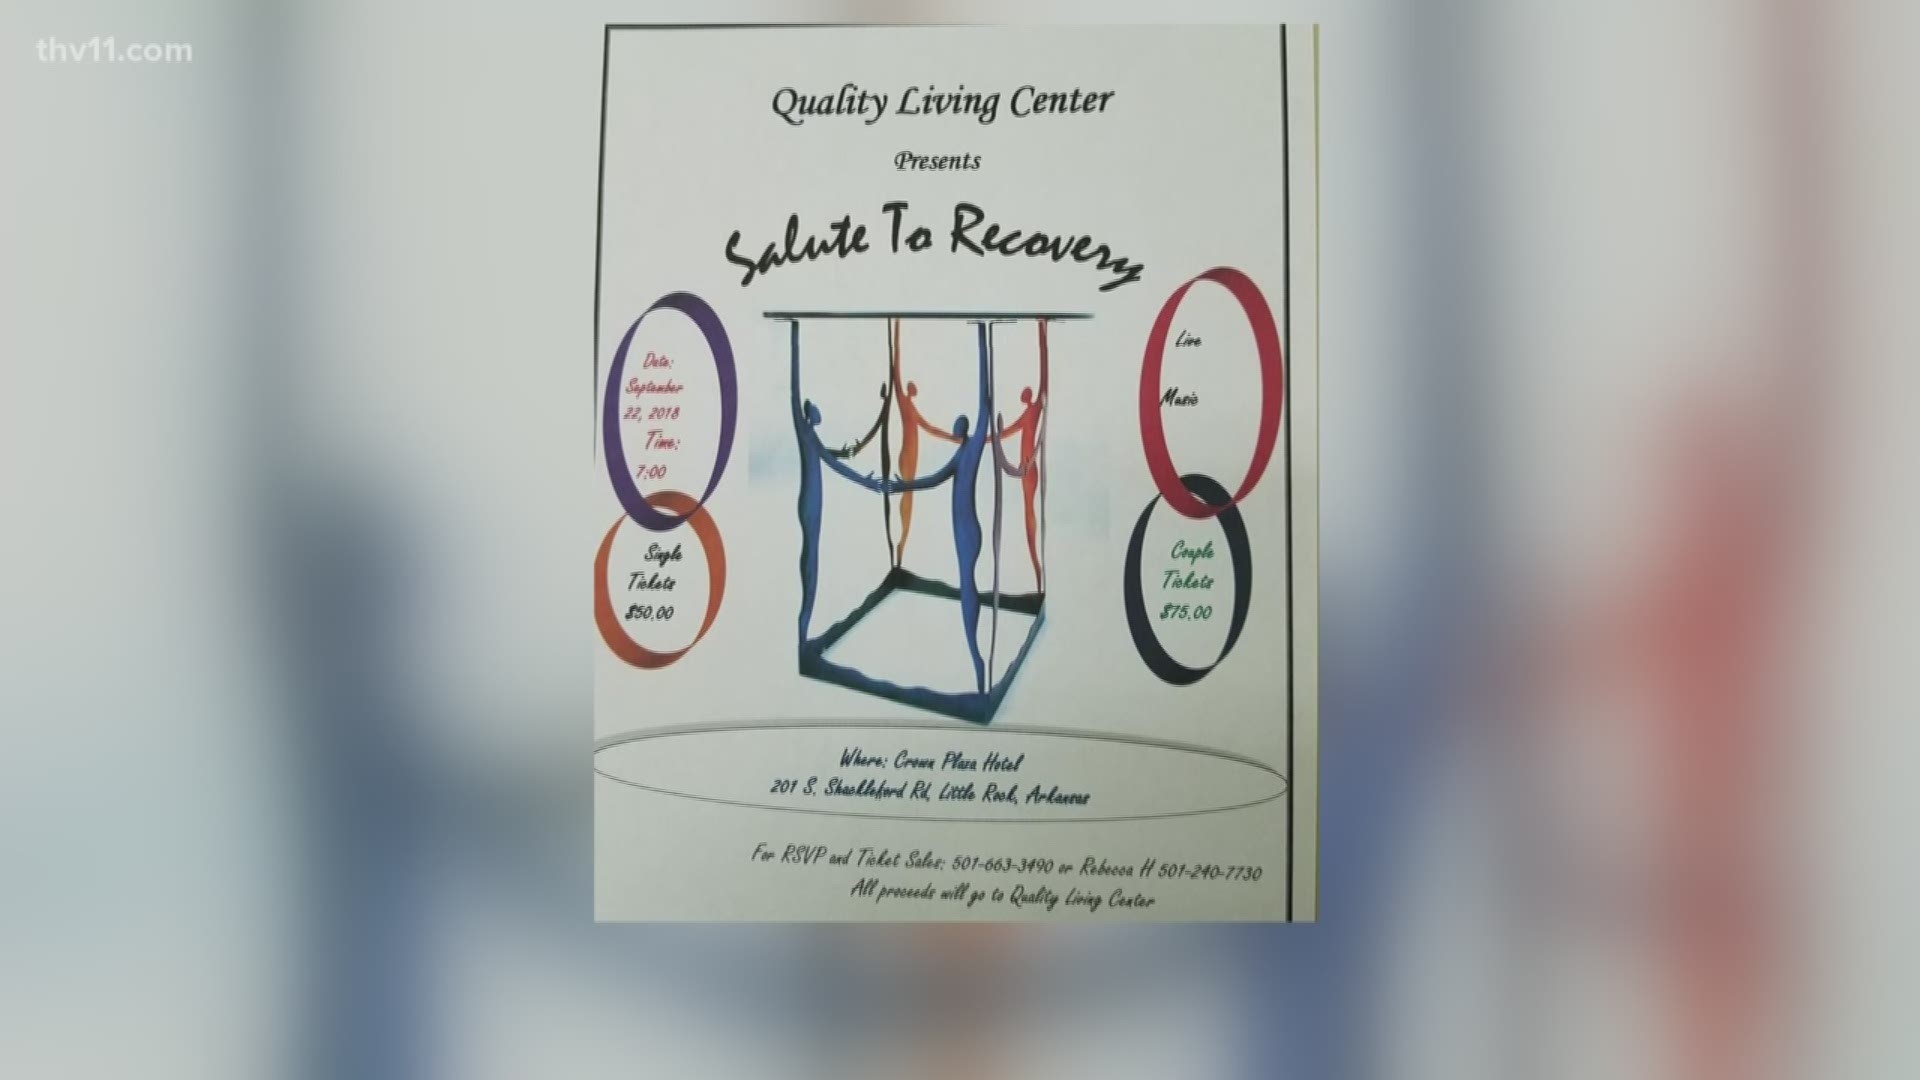 Quality Living Center works to help addiction sufferers get their lives back on track. Salute to Recovery helps make that happen.